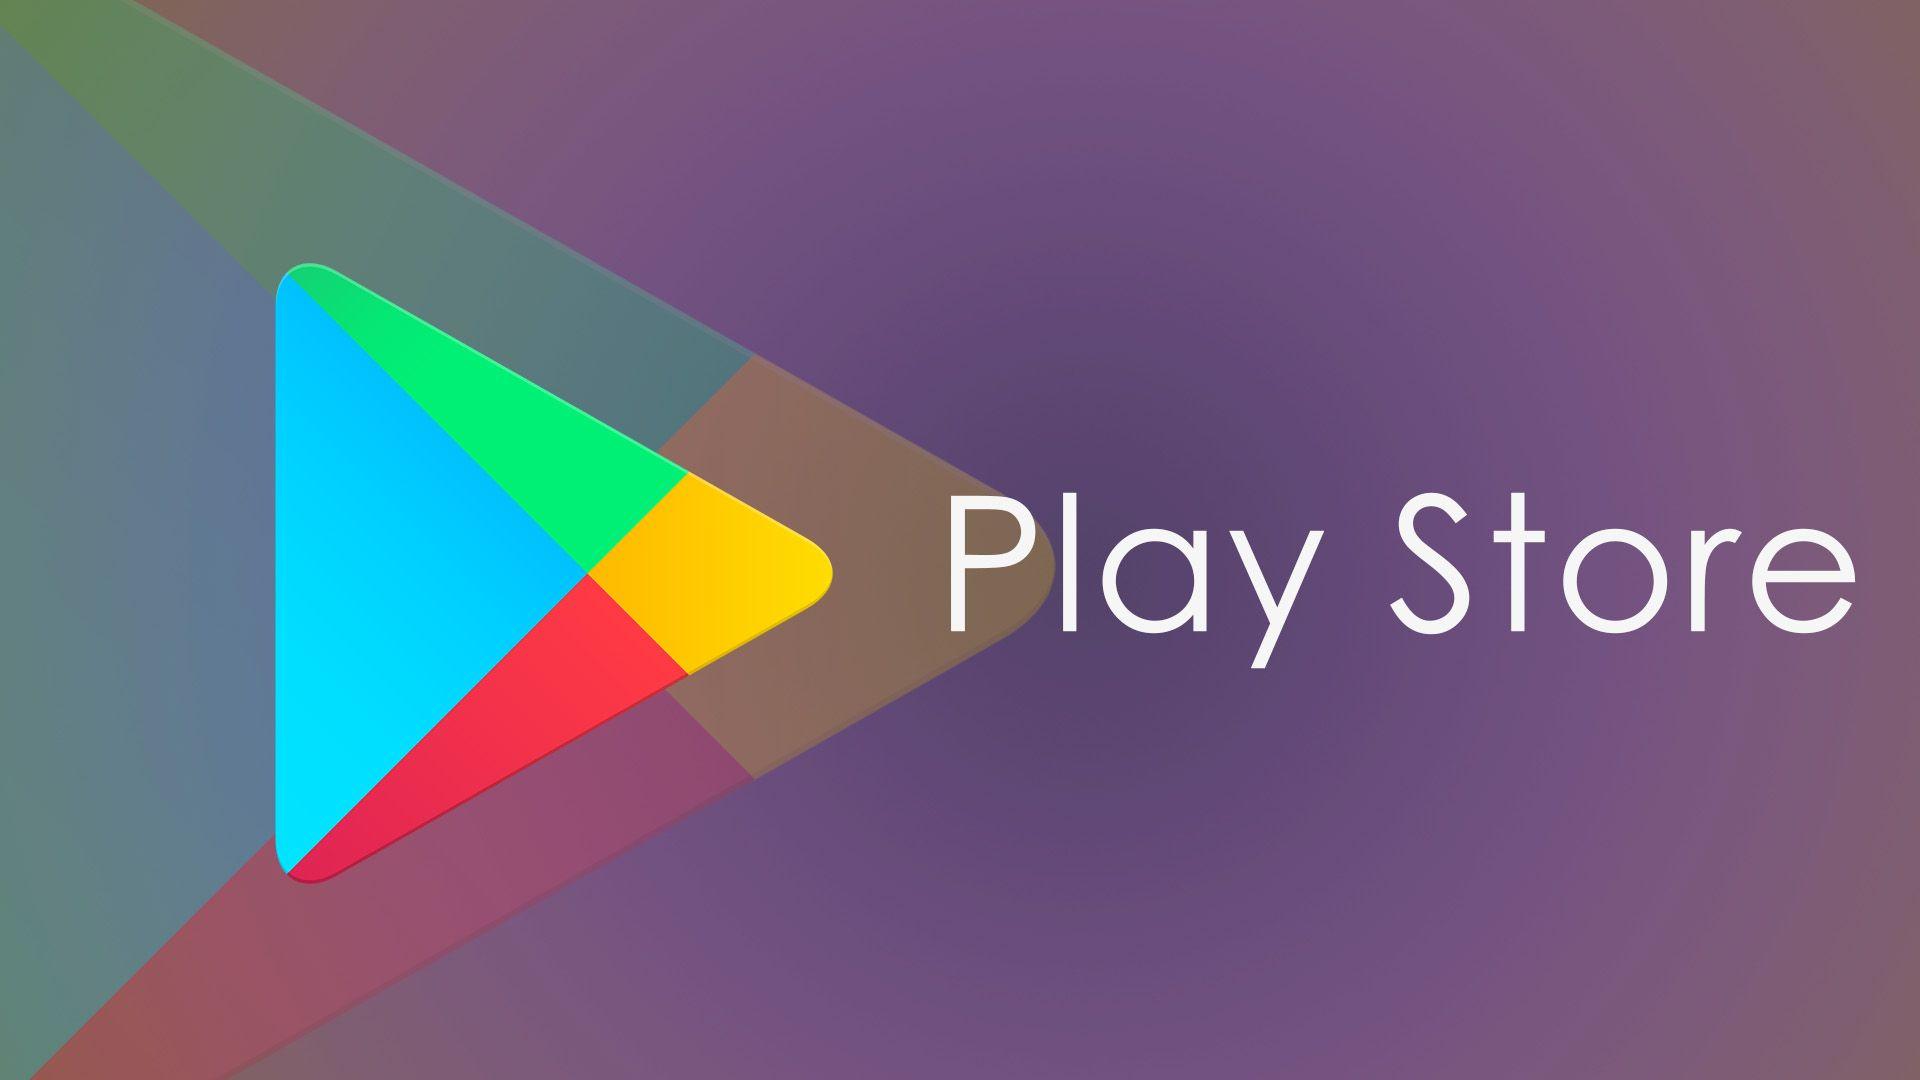 Play Store Logo - Google Play Store redesign under-works, colorless elements with ...